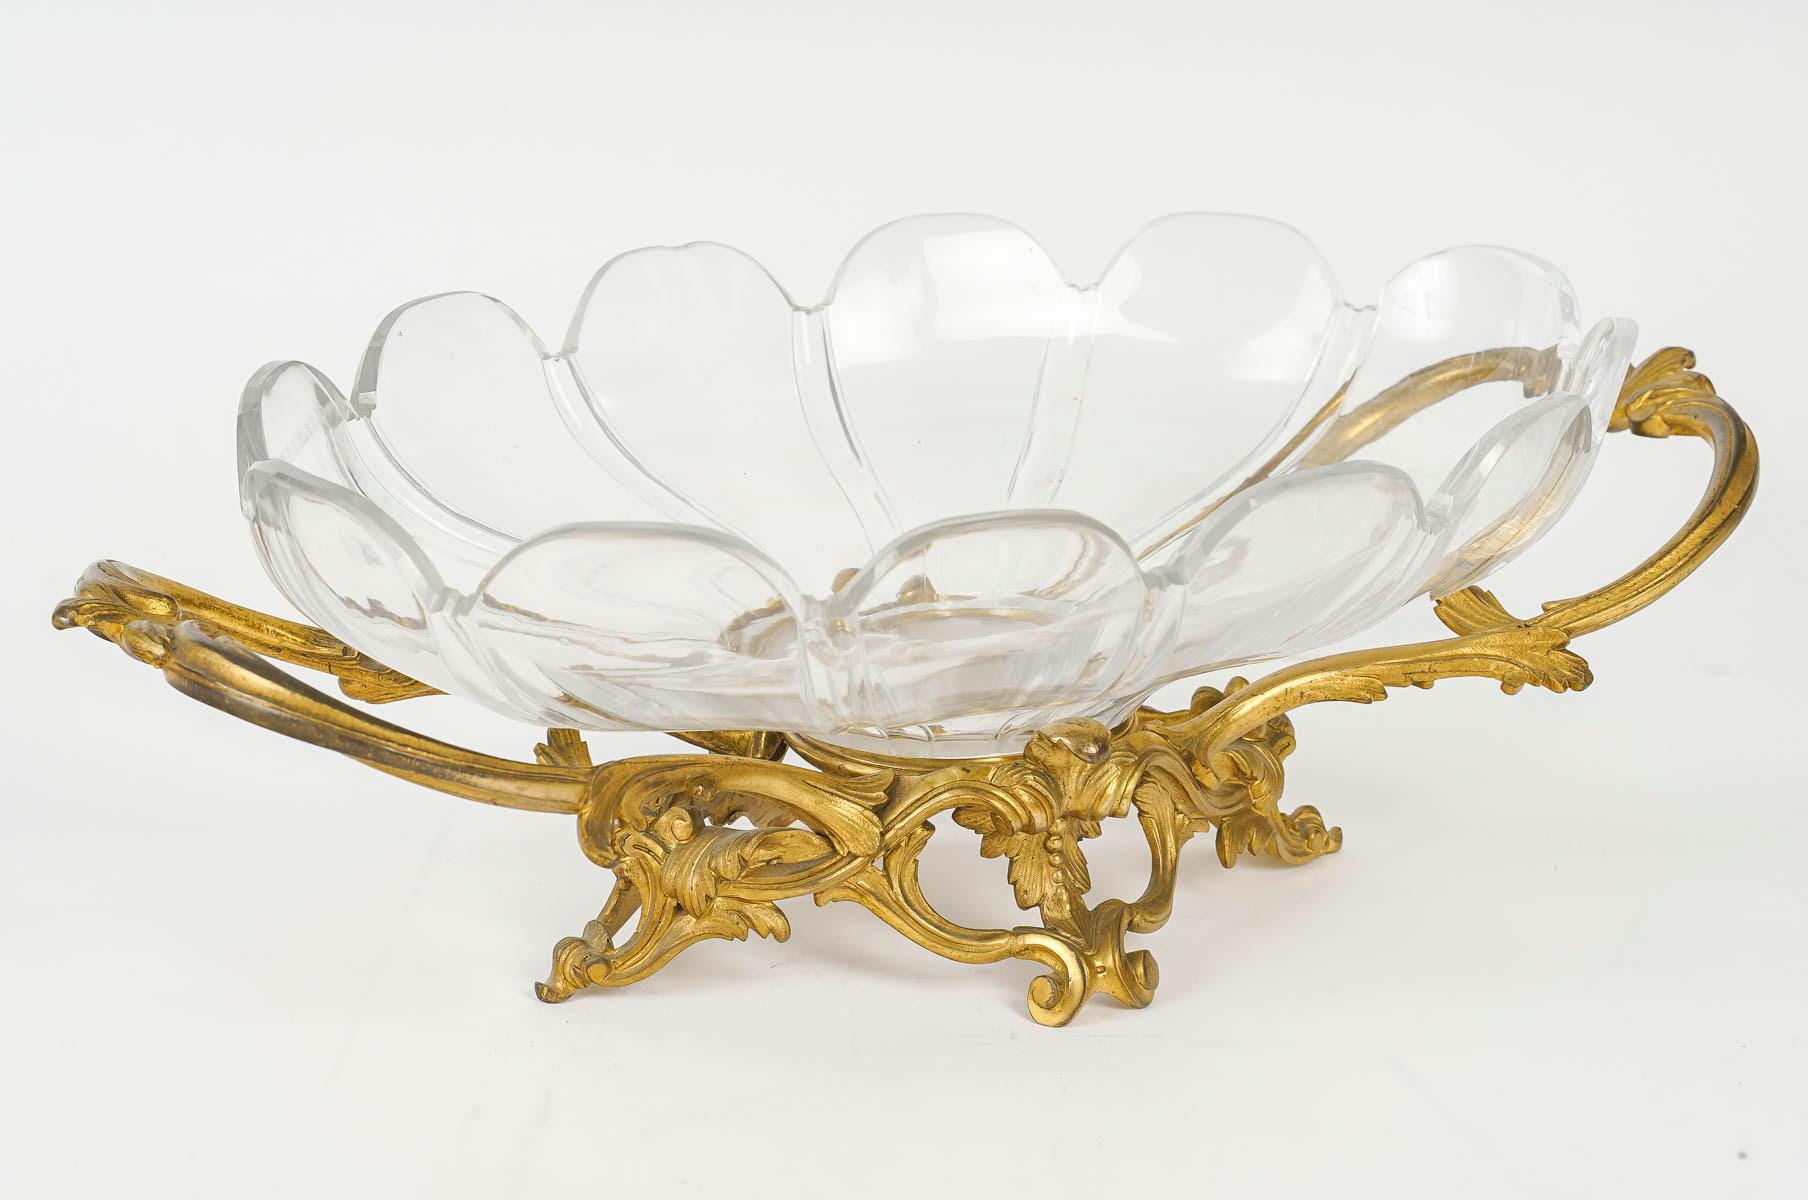 Louis XV style gilt bronze and crystal bowl, Napoleon III period.

A Napoleon III period gilt bronze and crystal bowl in the Louis XV style.
h: 14cm, w: 44cm, d: 23.5cm